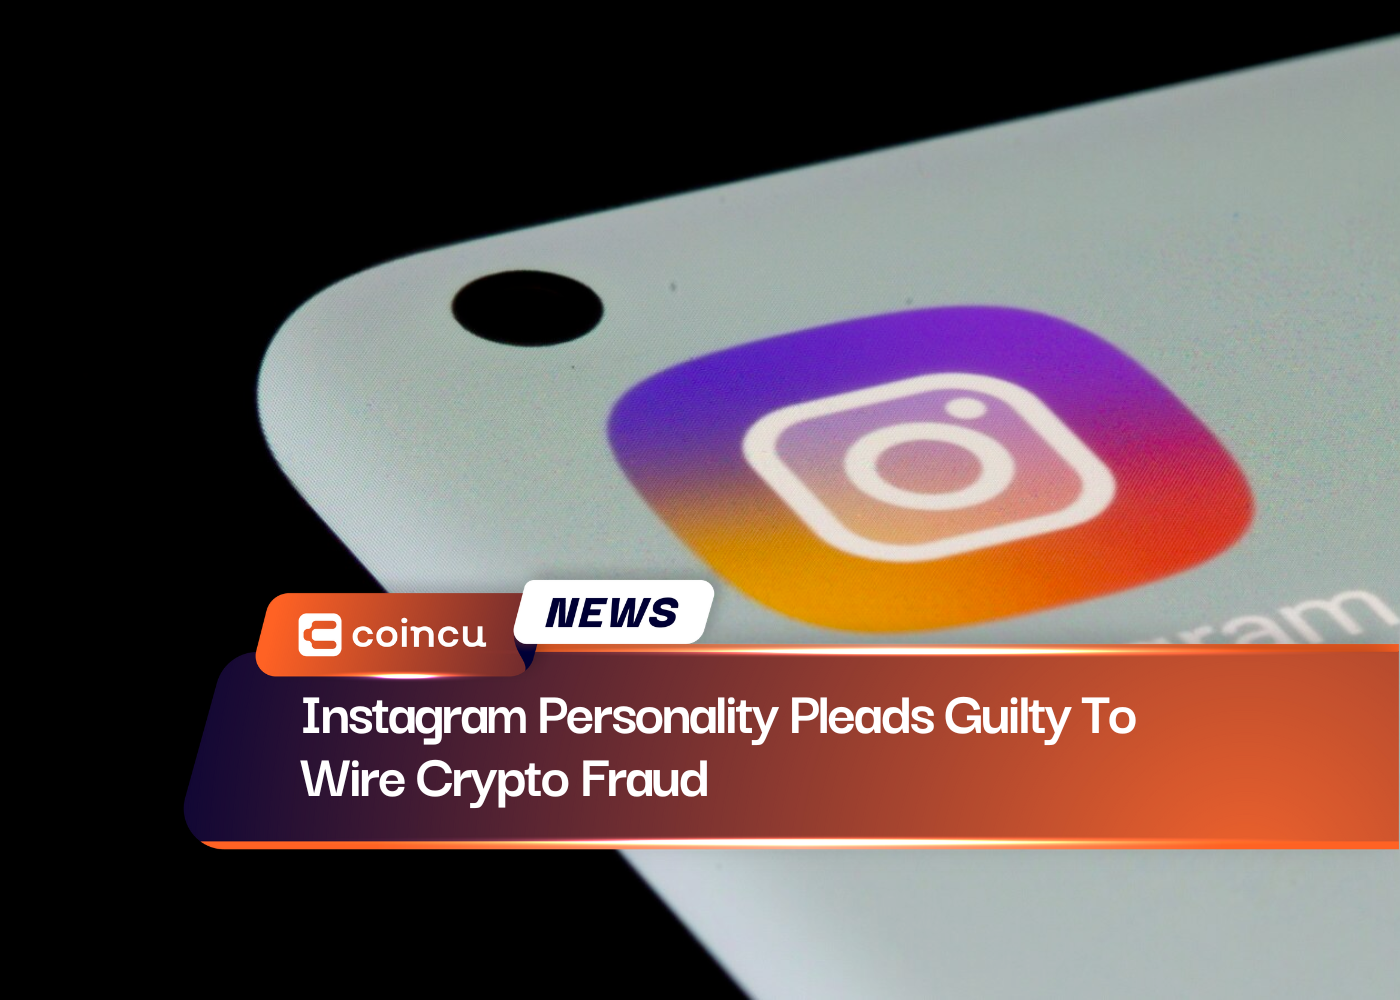 Instagram Personality Pleads Guilty To Wire Crypto Fraud